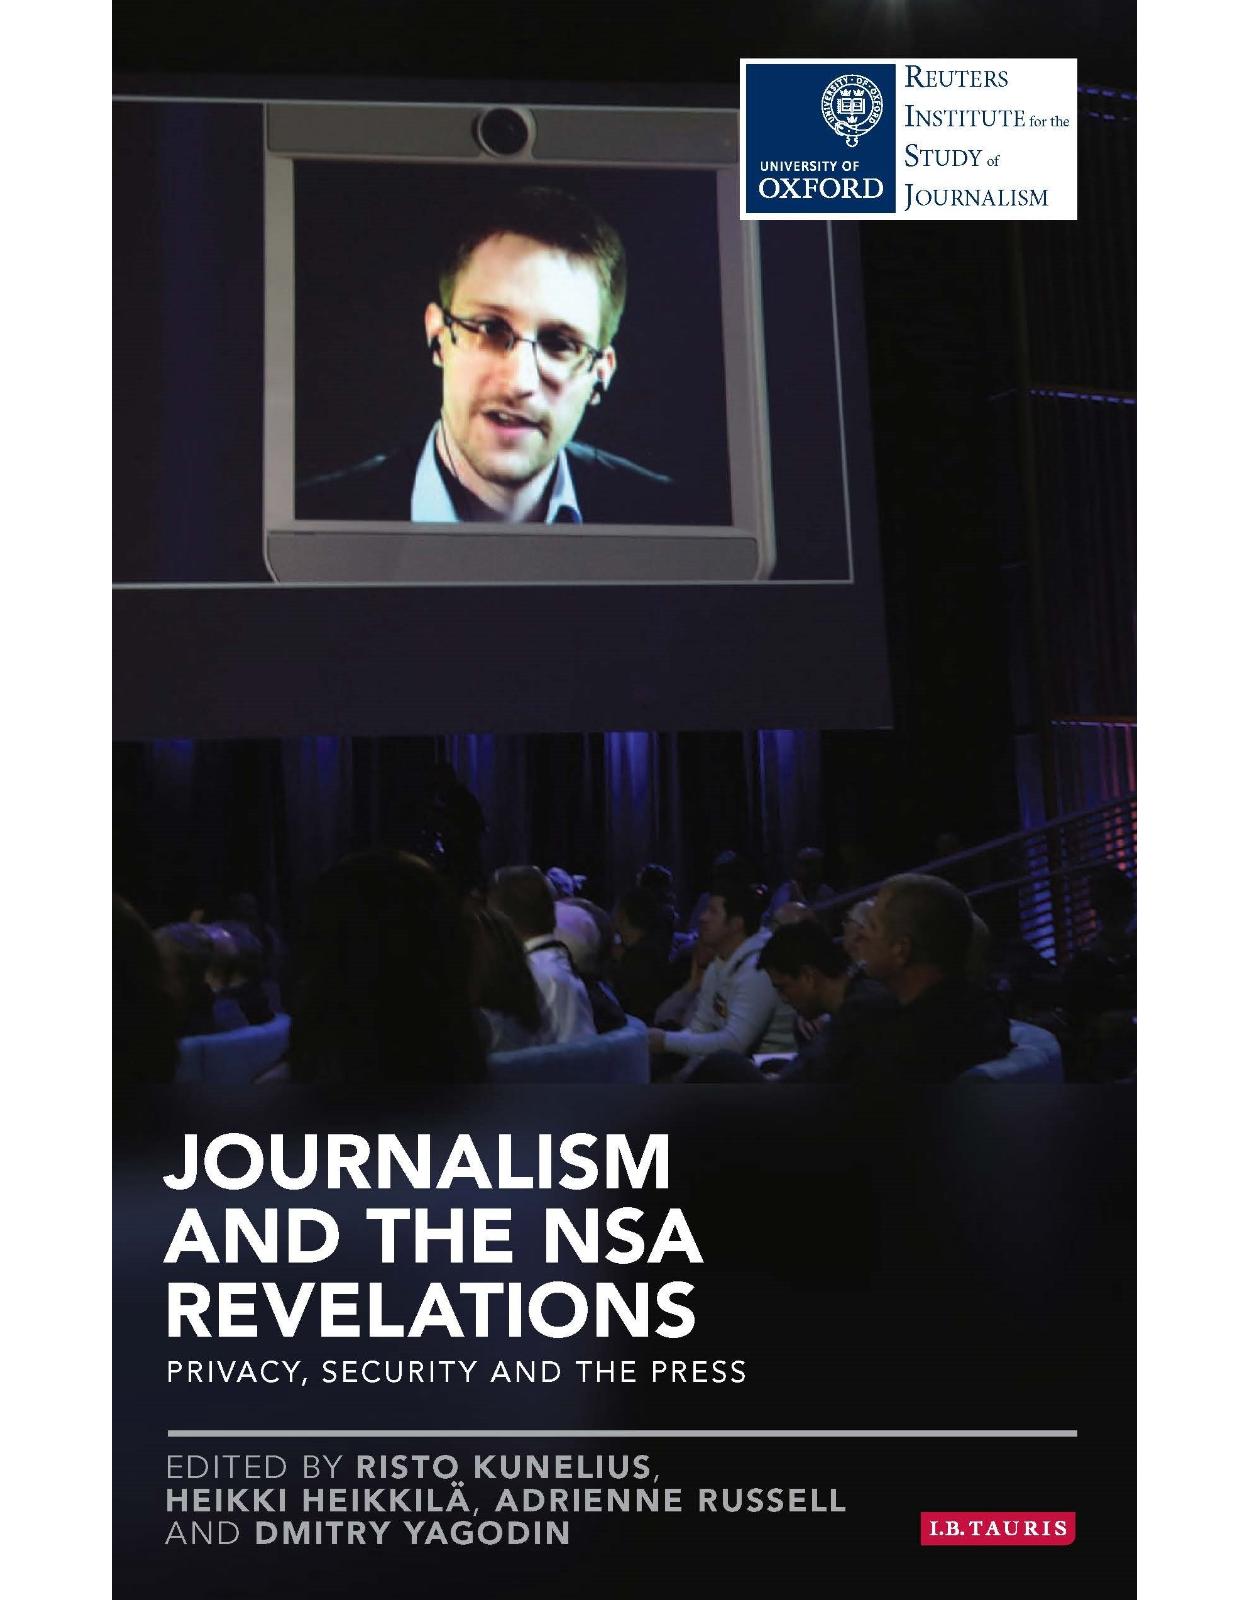 Journalism and the NSA Revelations (Reuters Institute for the Study of Journalism) 